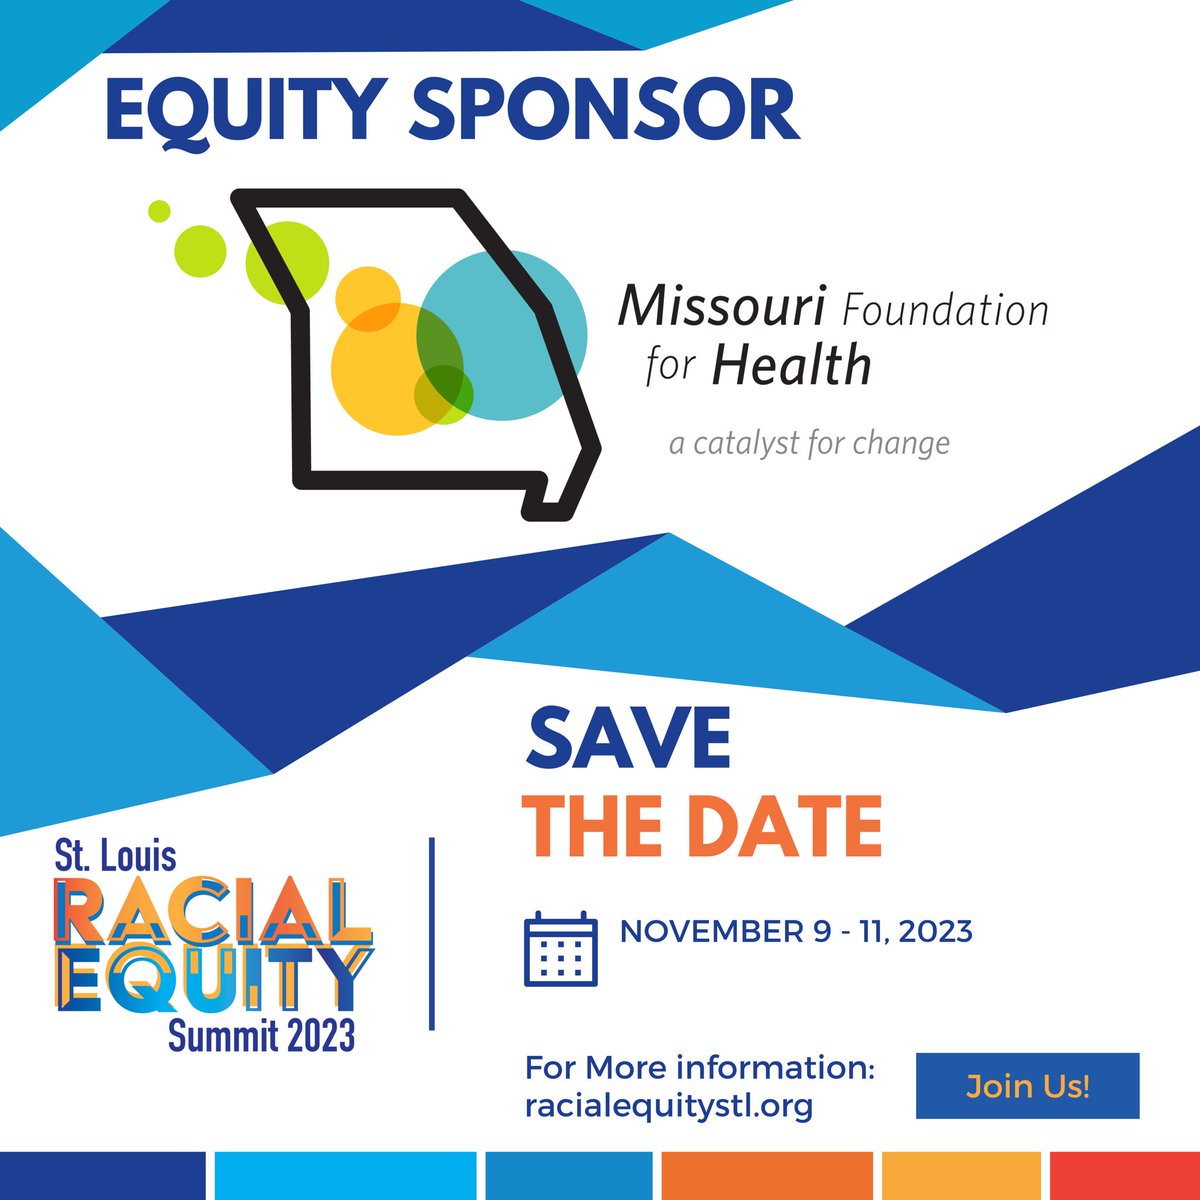 Join us at the 2023 St. Louis Racial Equity Summit! Sponsors like Missouri Foundation for Health help  amplify impact, reach more communities, and create lasting change.  Thank you! #STLRES23 #RacialEquity #TogetherWeRise #Summit2023 #RacialJustice #CommunityAction #InclusionNow